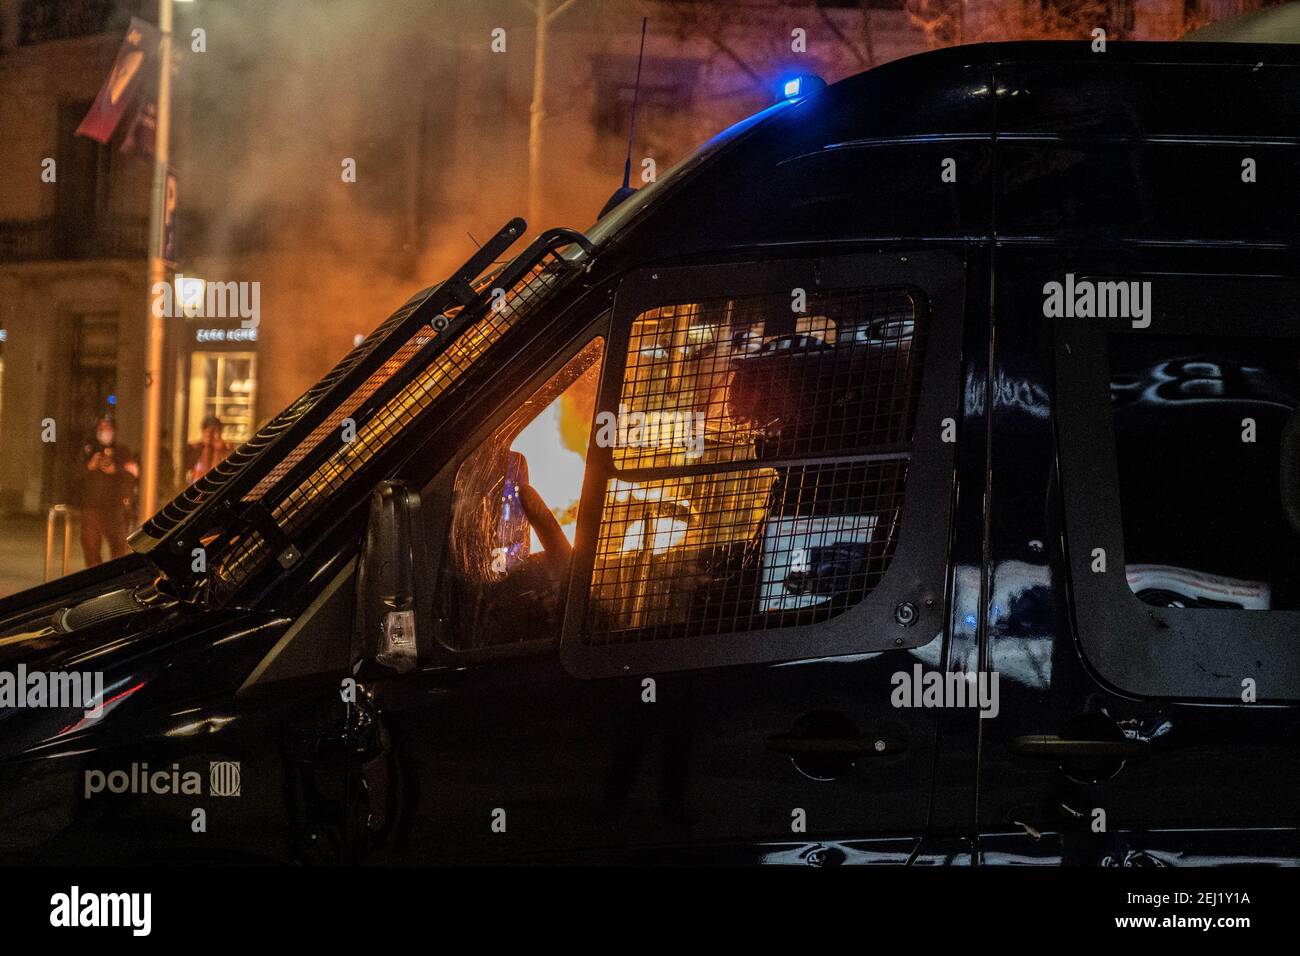 A riot police van is pictured on Passeig de Gràcia next to a burning barricade during the protest. Fifth night of protests and riots in response to the arrest and imprisonment of rapper Pablo Hasel accused of exalting terrorism and insulting the crown for the content of the lyrics of his songs. Stock Photo